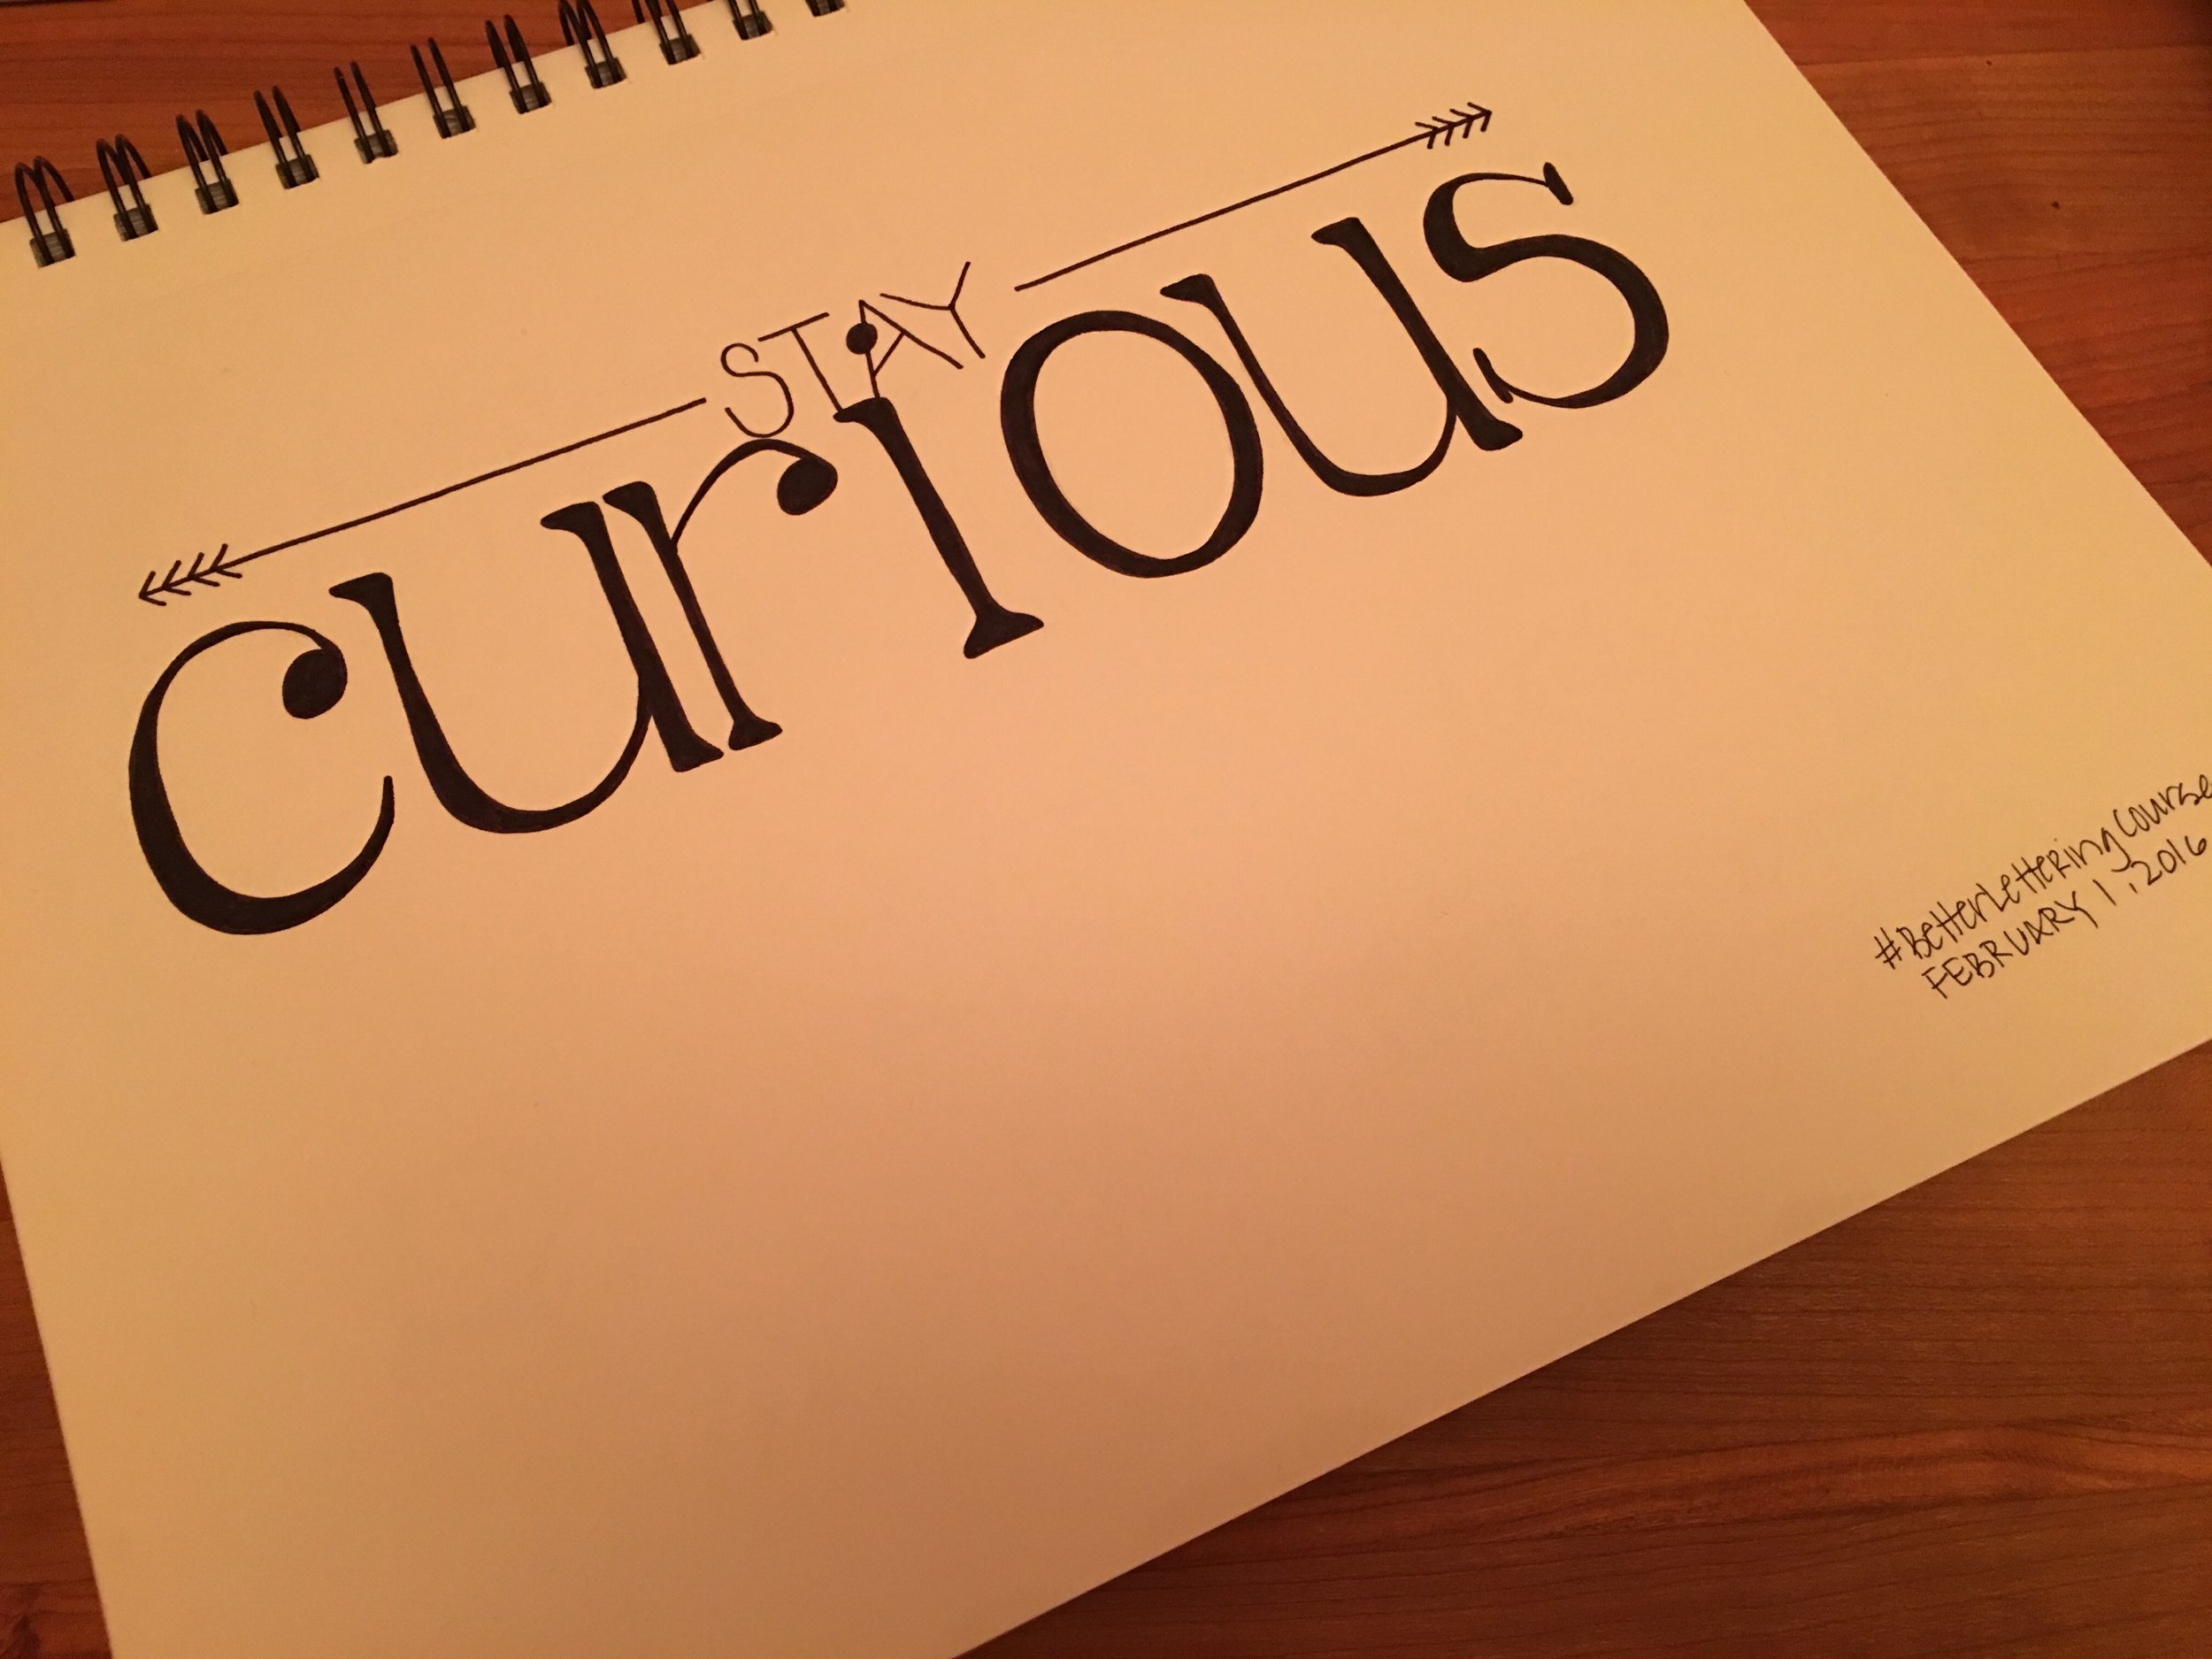 hand lettering by emily reeves dean that says stay curious